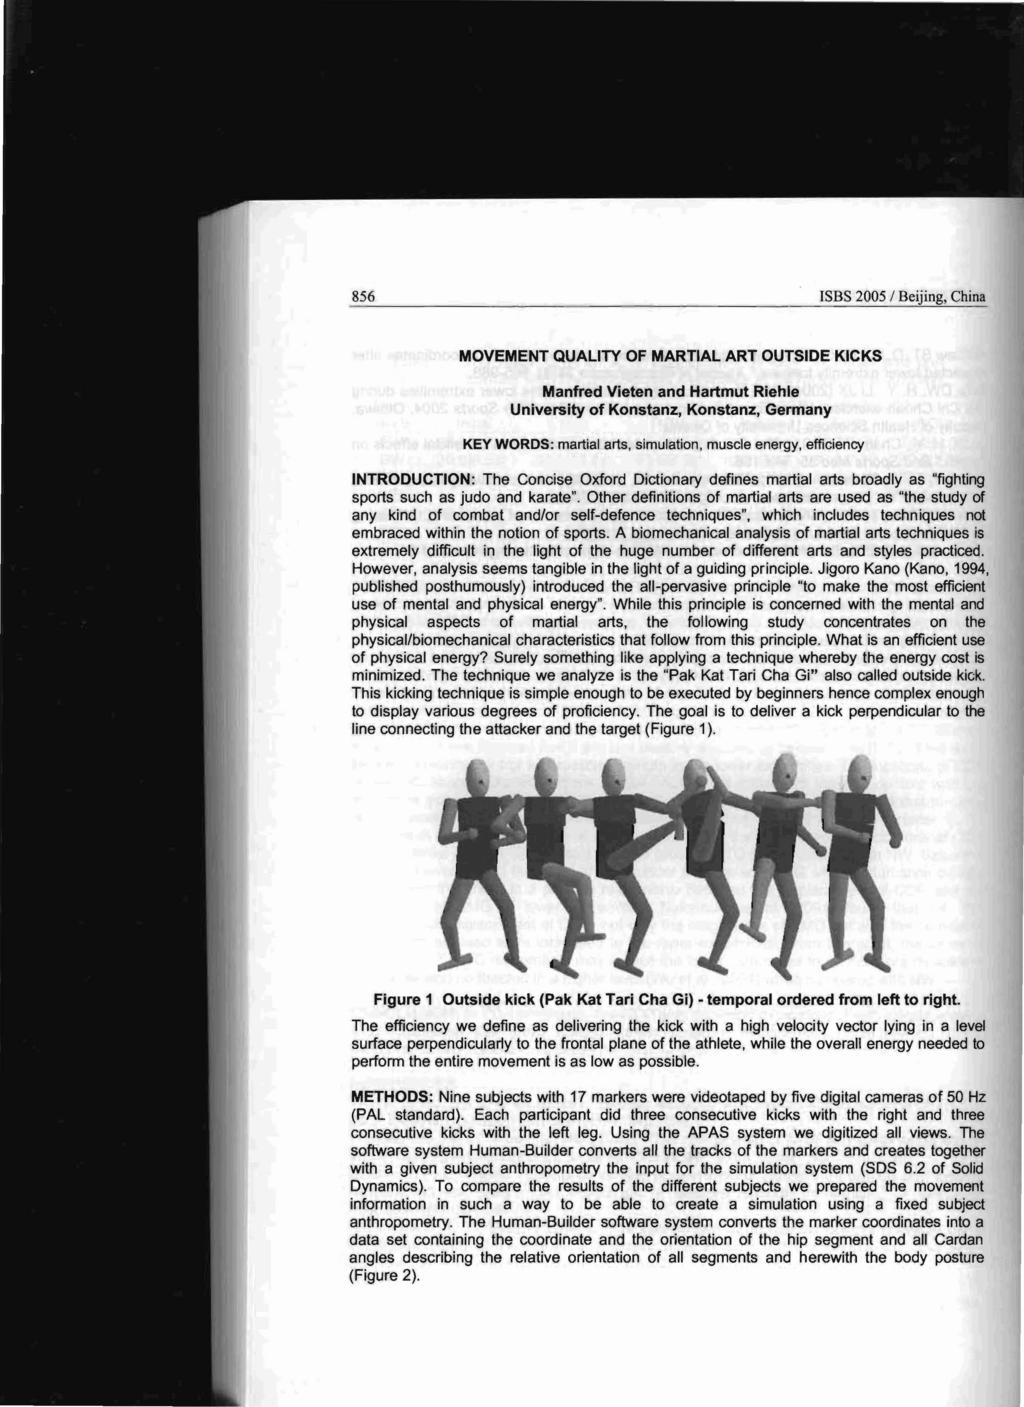 856 ISBS 2005 / Beijing, China MOVEMENT QUALITY OF MARTIAL ART OUTSIDE KICKS Manfred Vieten and Hartmut Riehle University of Konstanz, Konstanz, Germany KEY WORDS: martial arts, simulation, muscle